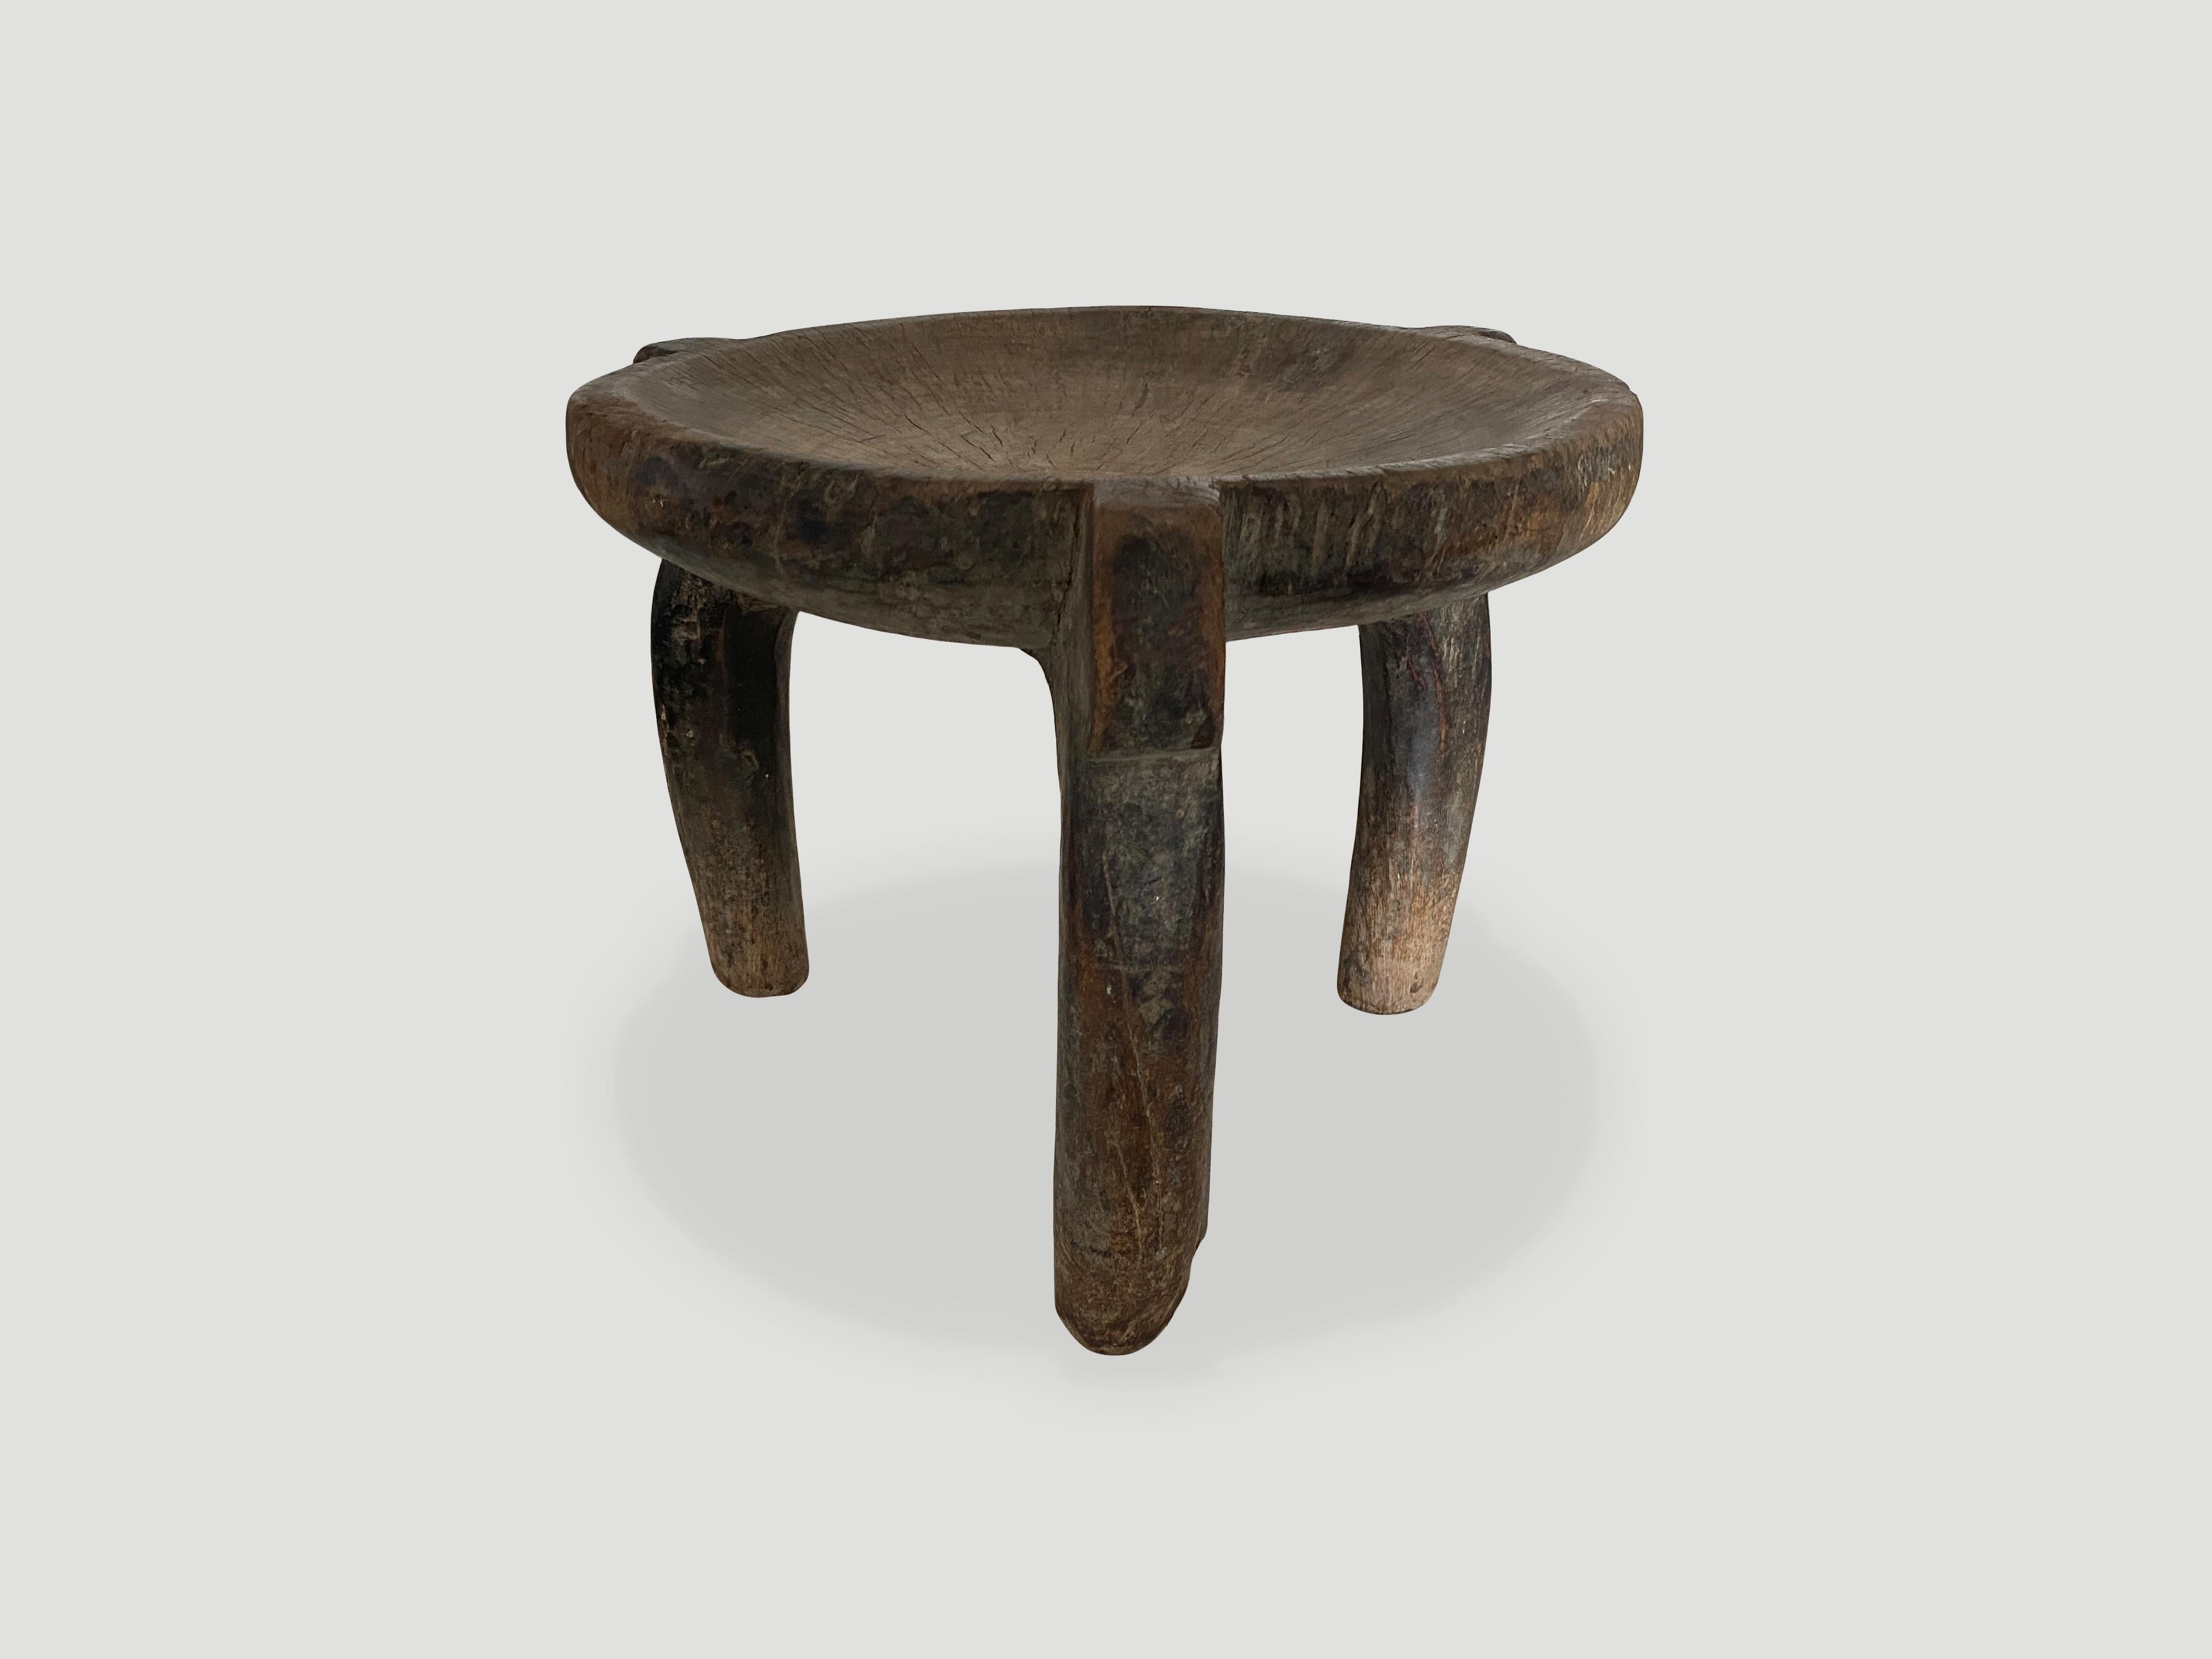 Andrianna Shamaris Antique African Stool, Side Table or Bowl In Excellent Condition For Sale In New York, NY